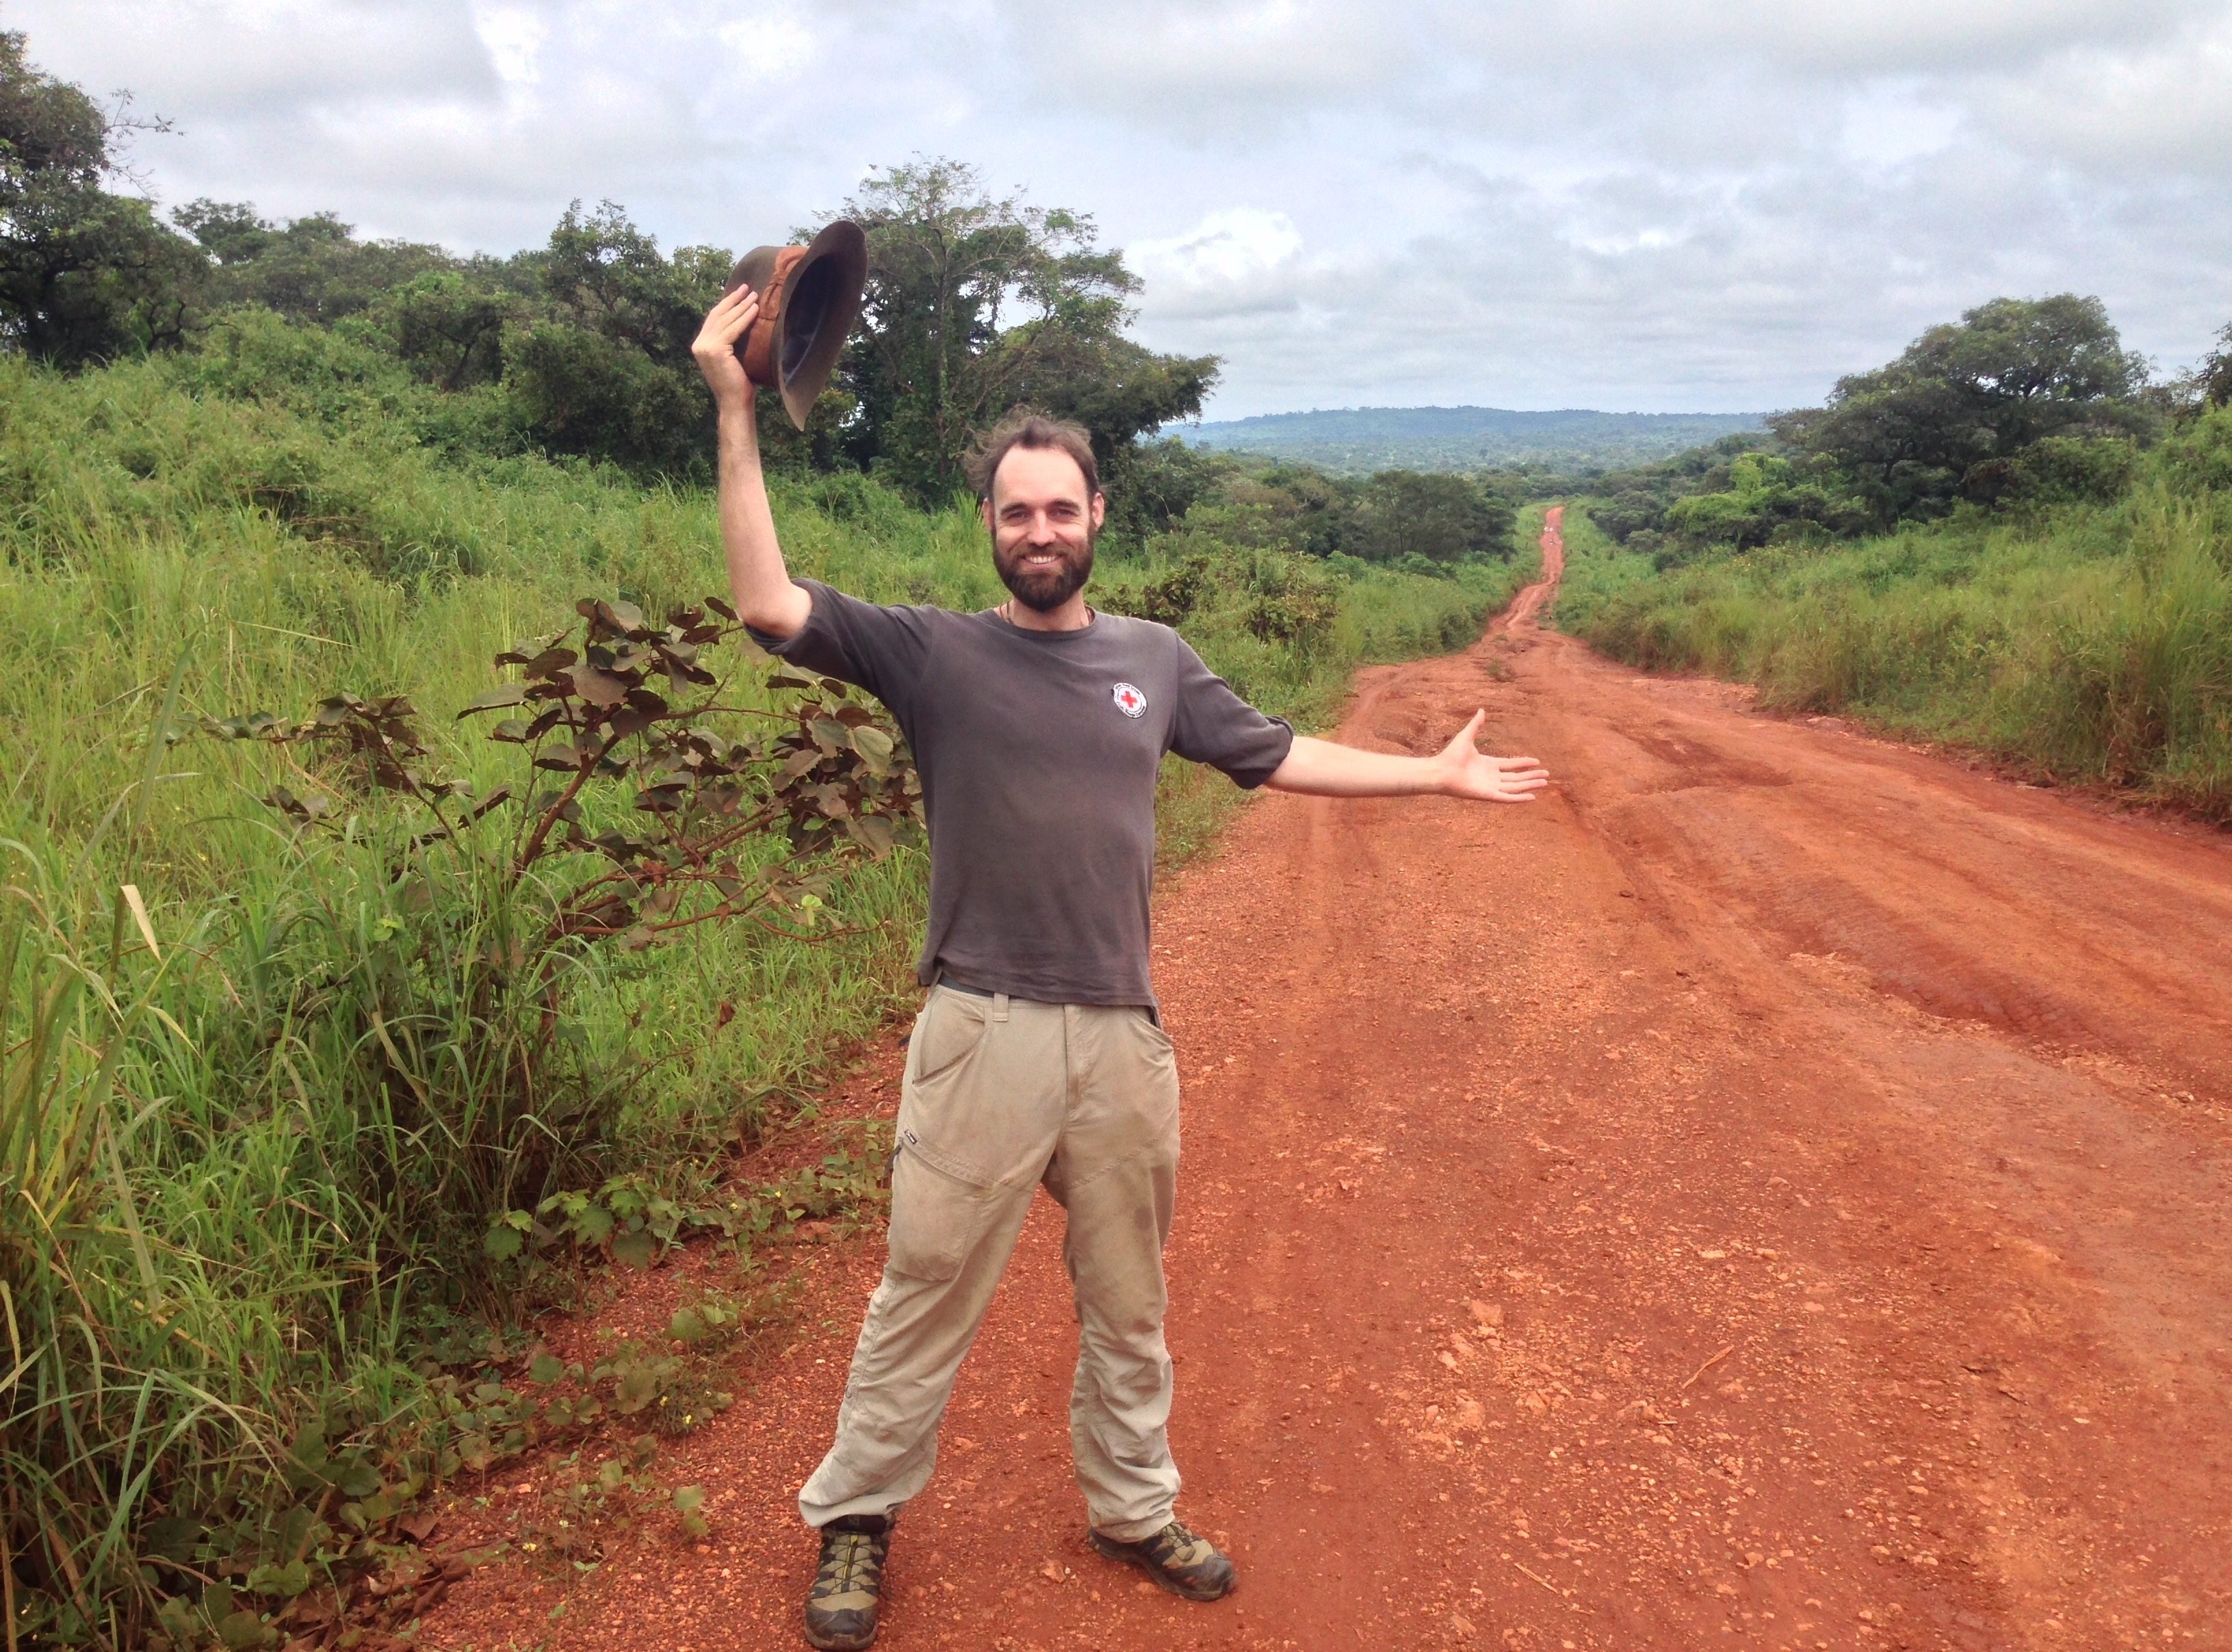 Pederson on a main road connecting the Central African Republic and Cameroon, in 2016. Photo: Torbjørn Pedersen